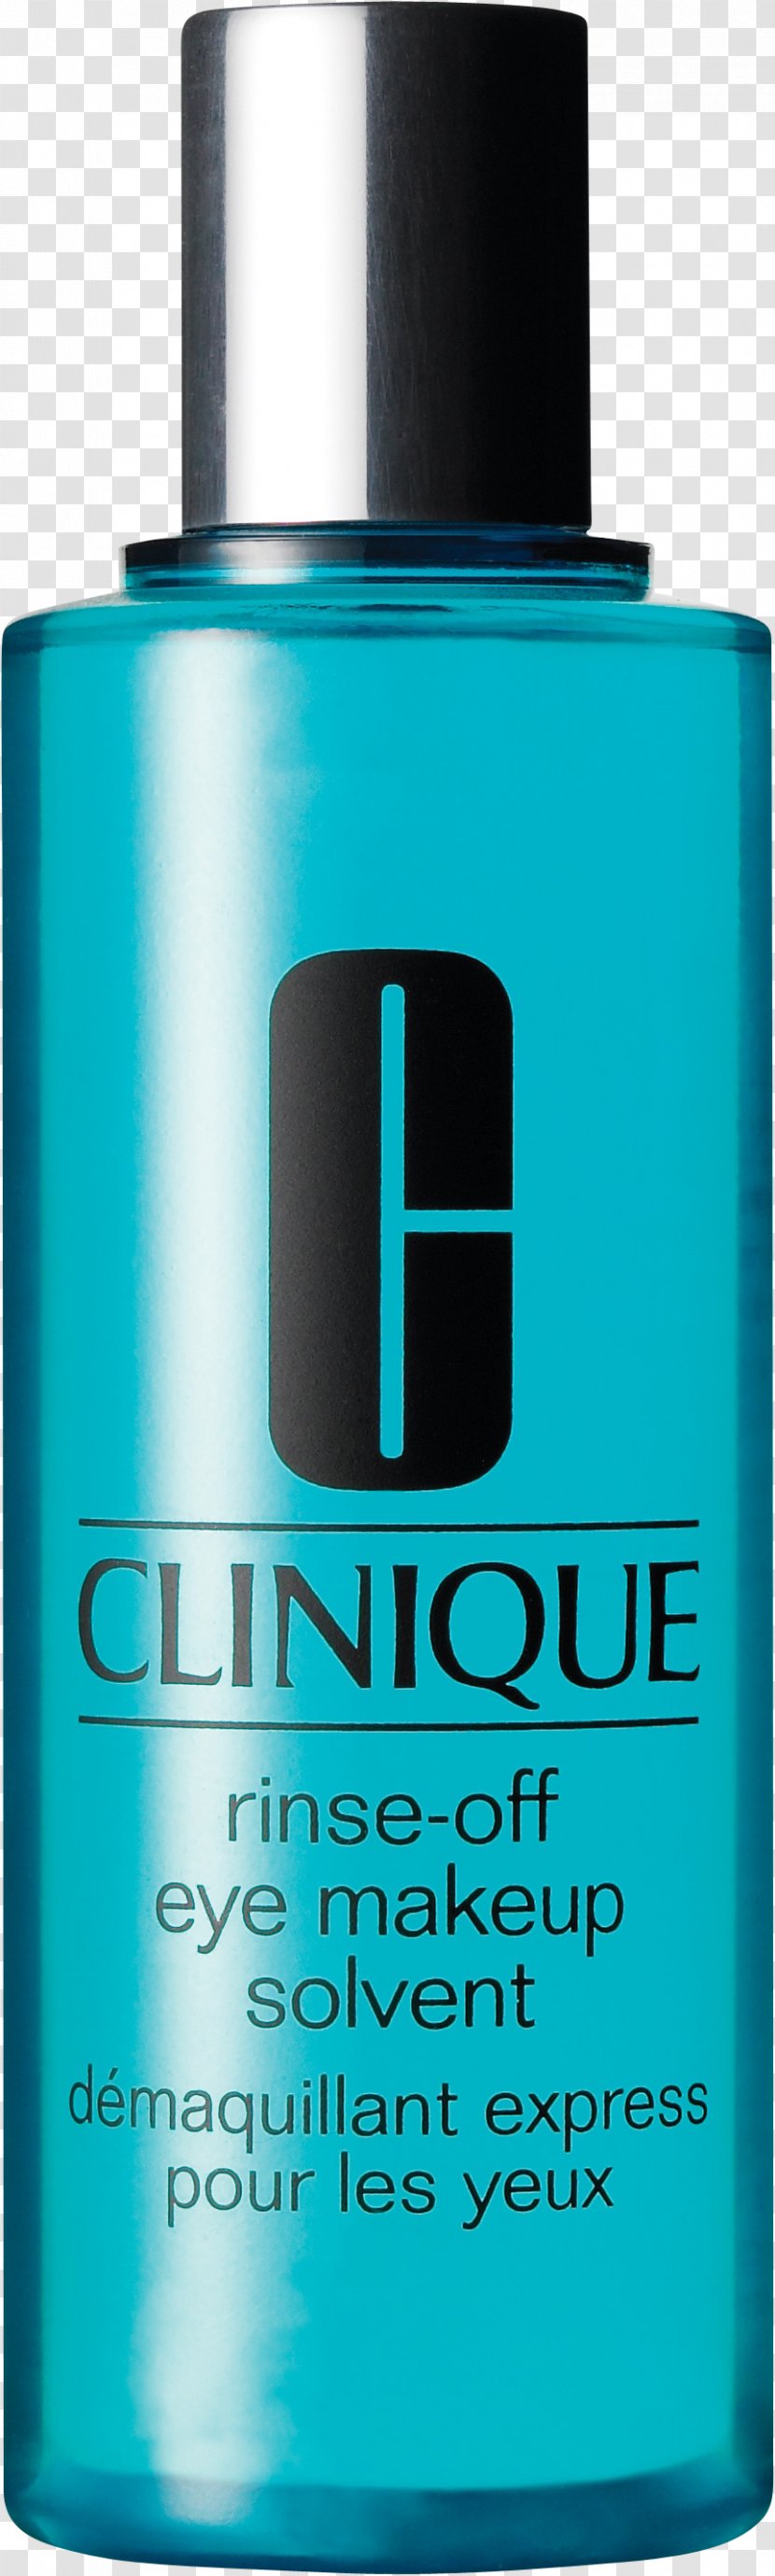 Clinique Lash Power Mascara Cosmetics Lotion Hair Conditioner - Water - Spray Transparent PNG